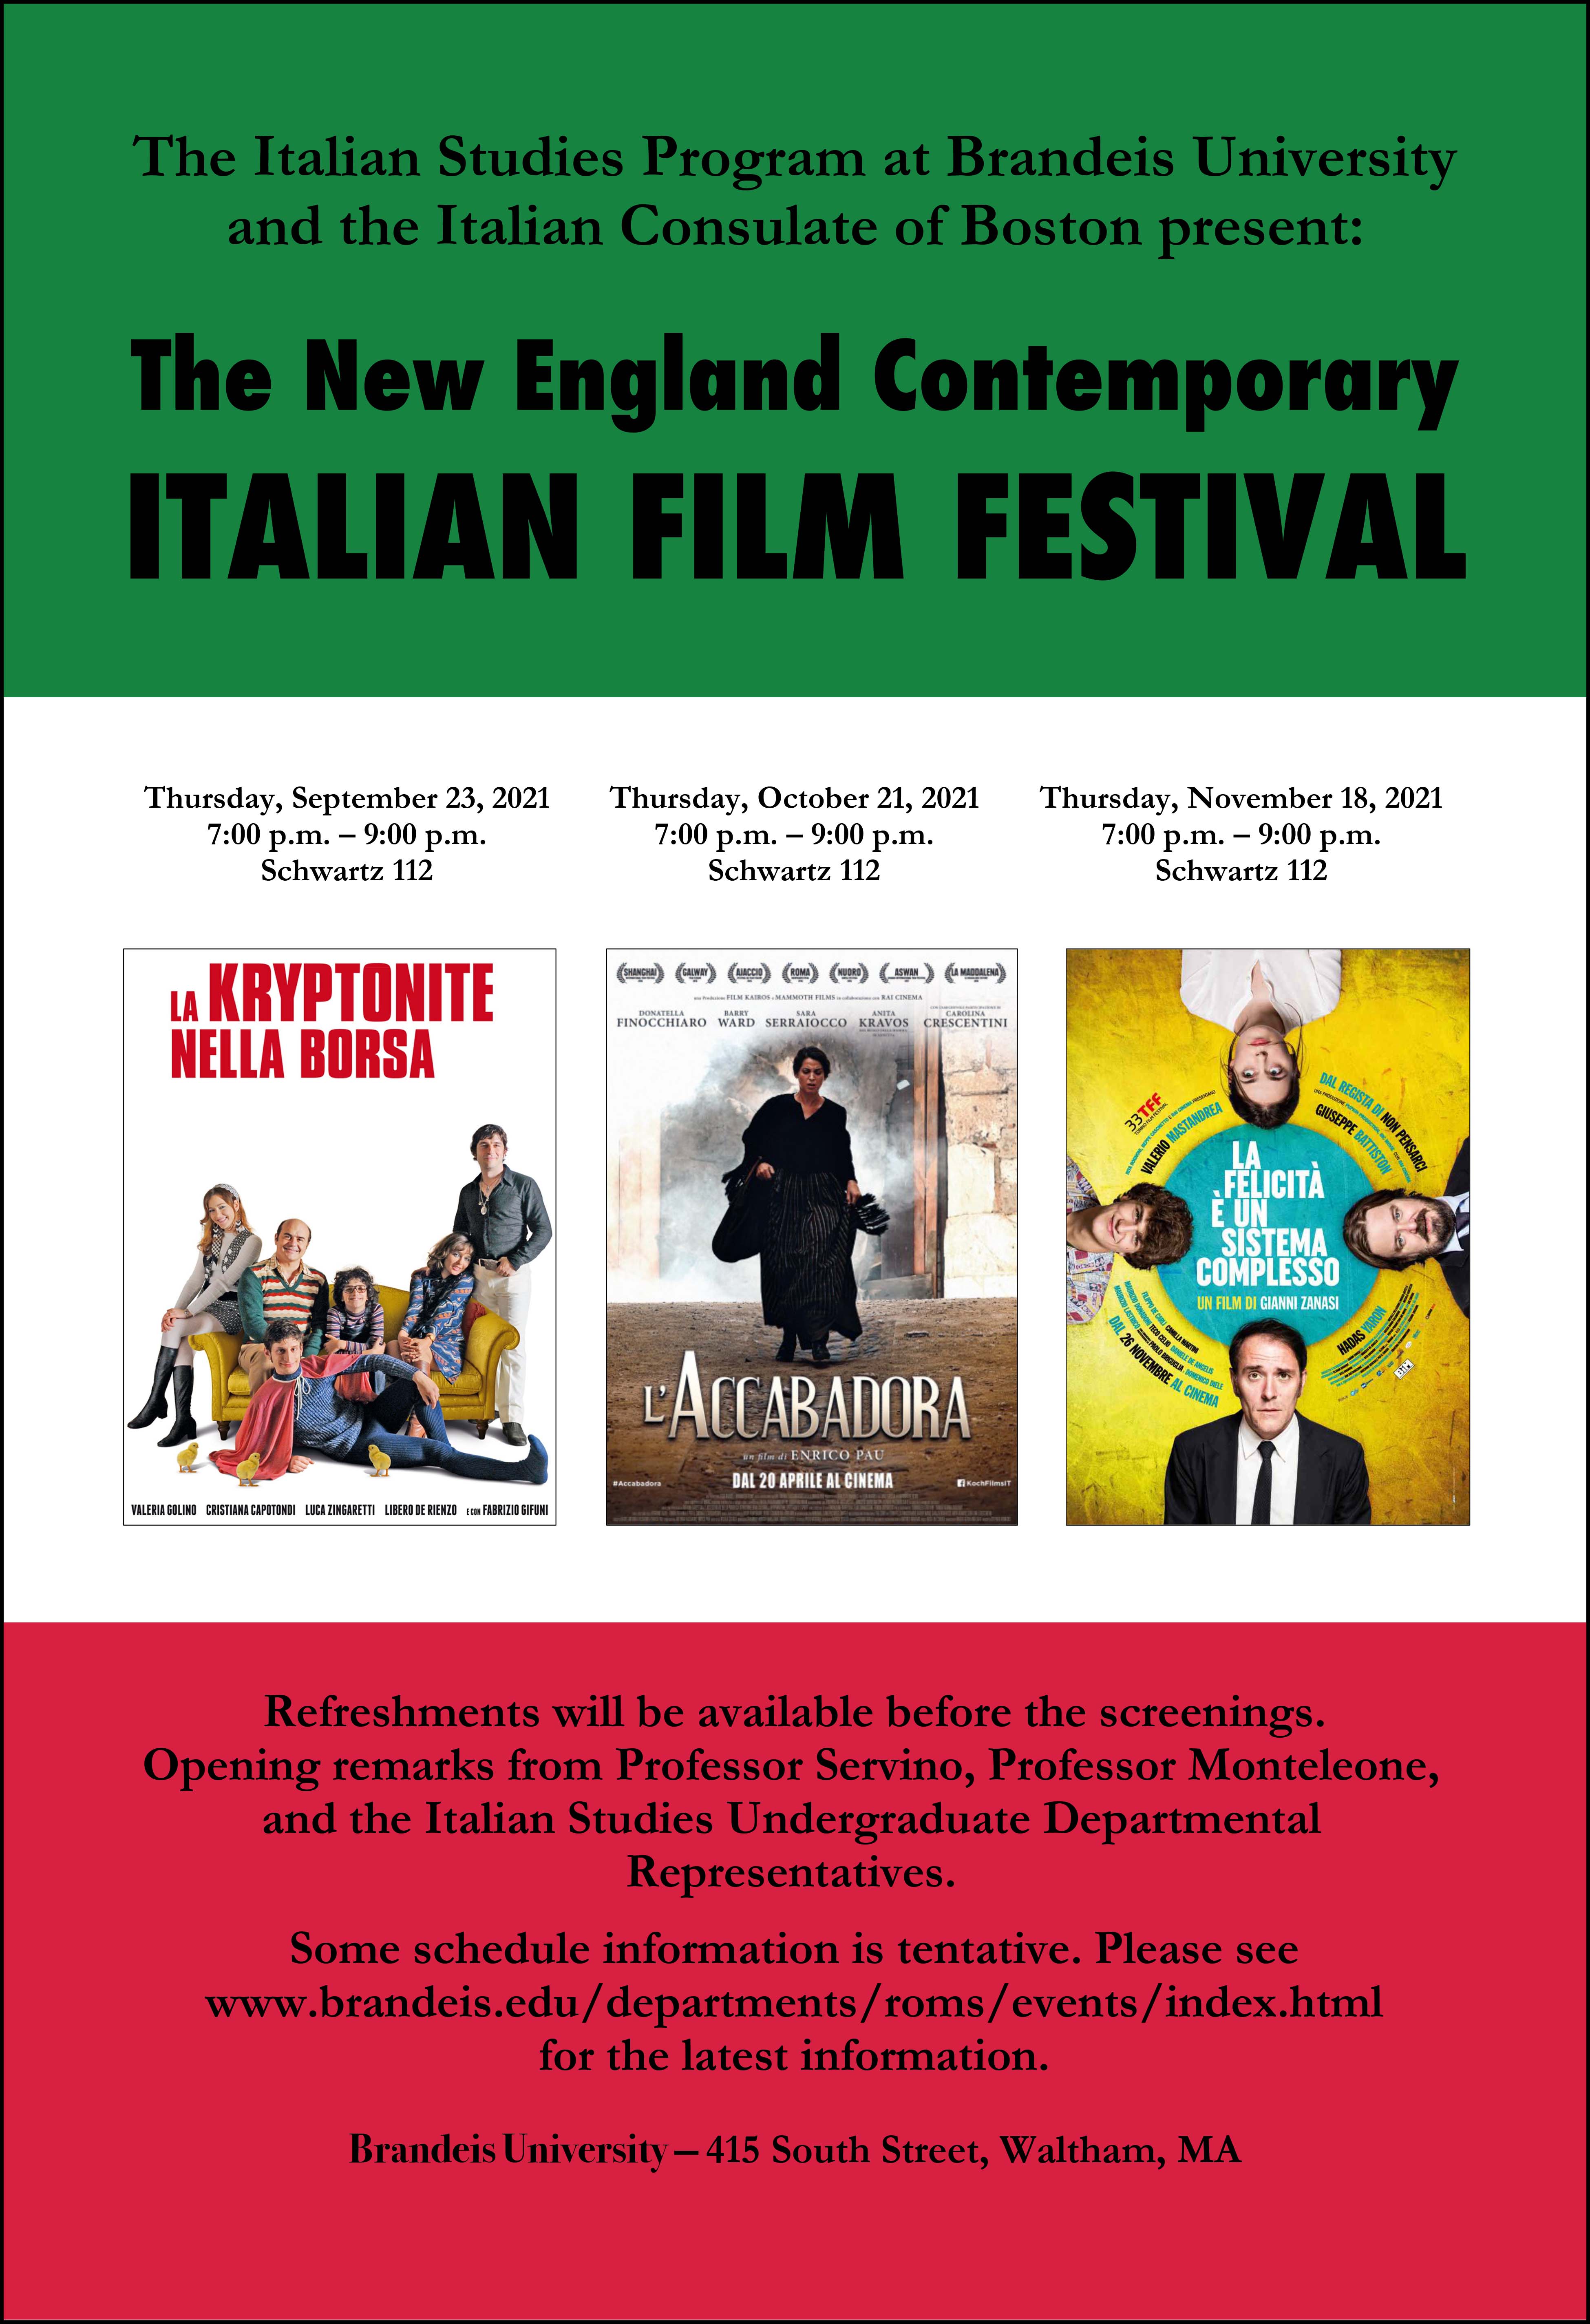 poster for Italian Film Festival with posters for all three films and other information listed in text for event.